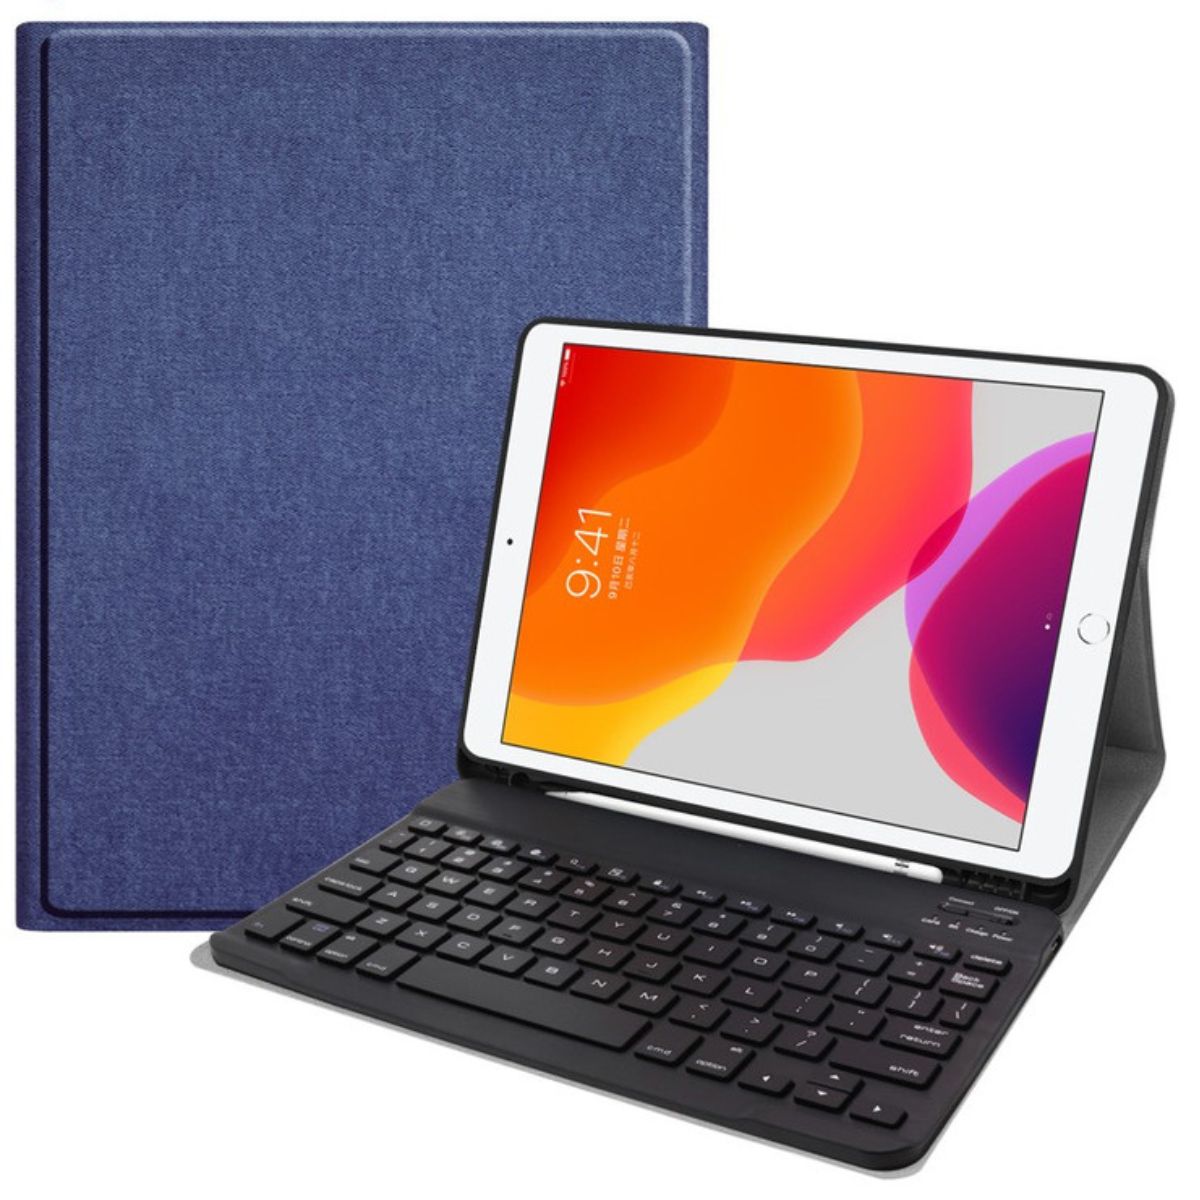 SK-09 Navy Case Ipad 7 2019 Ipad 8 th 9 th 2021 2020 10.2 Inch Air 3 10.5 Inch Leather Case Wireless Bluetooth FLIP COVER Sarung Keyboard Pen Slot